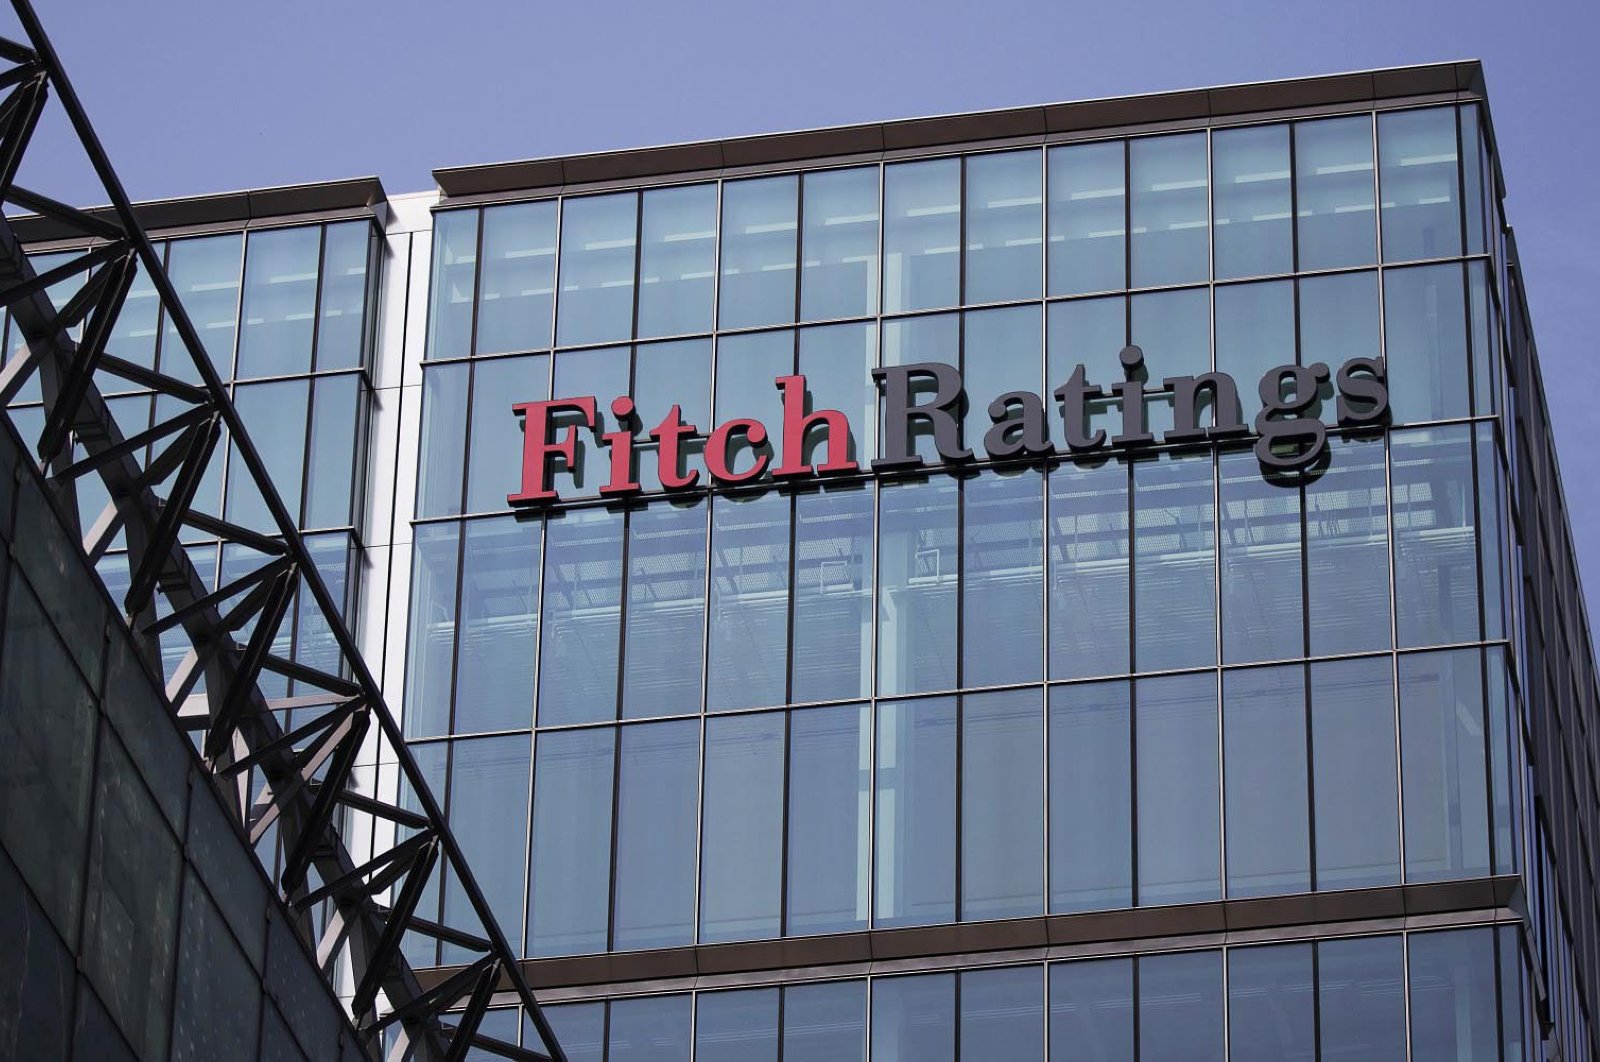 The headquarters of Fitch Ratings Ltd. stands in the Canary Wharf business and shopping district in London, U.K. (AFP Photo)